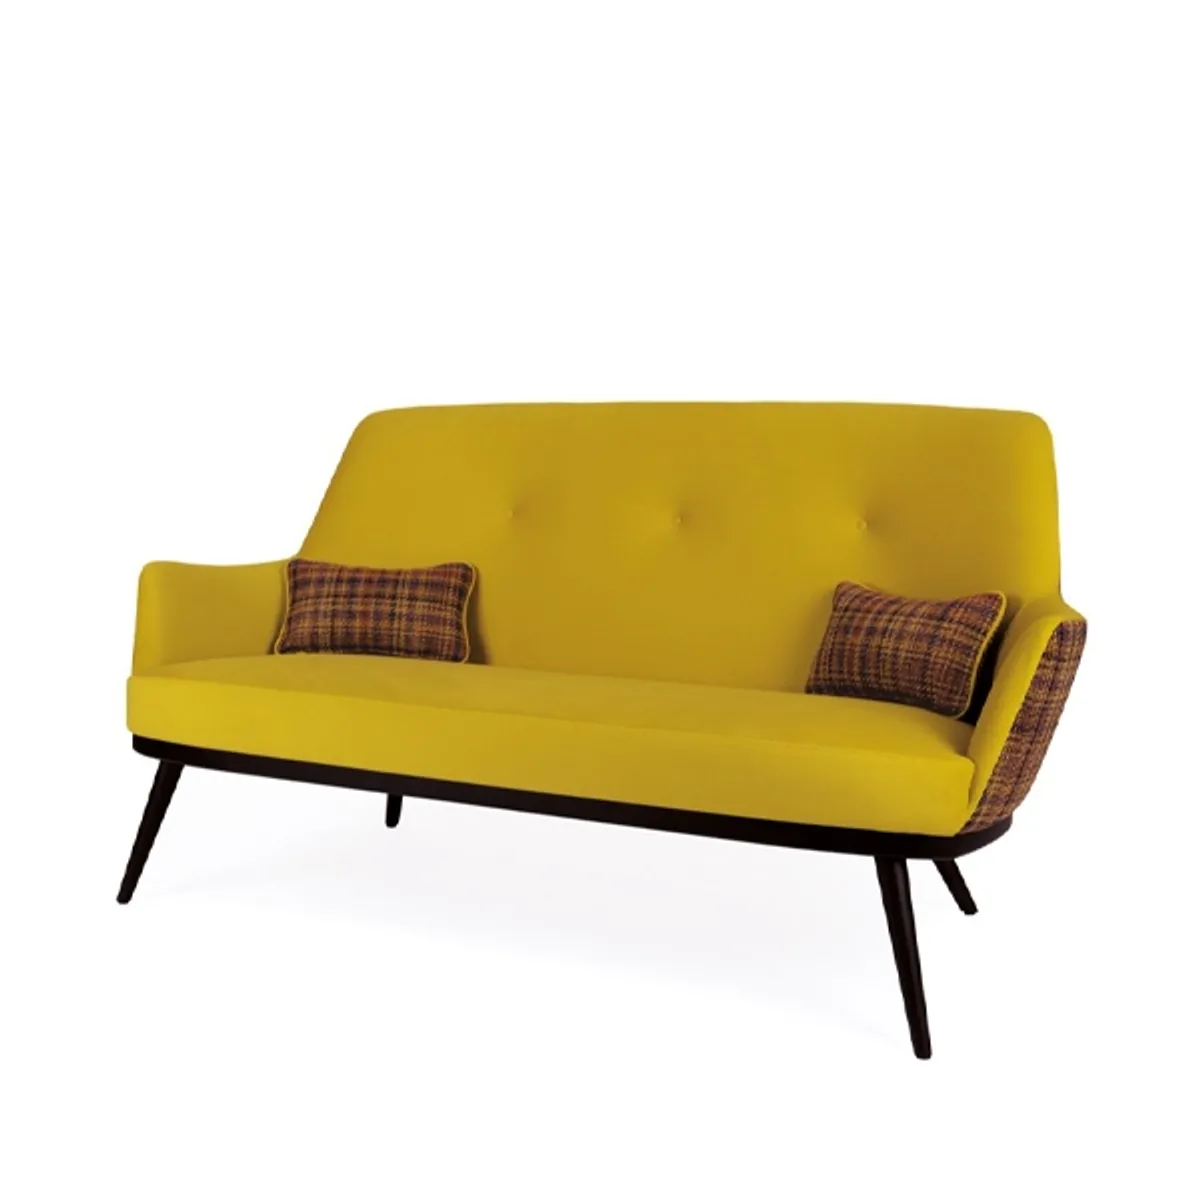 Pud sofa Inside Out Contracts2